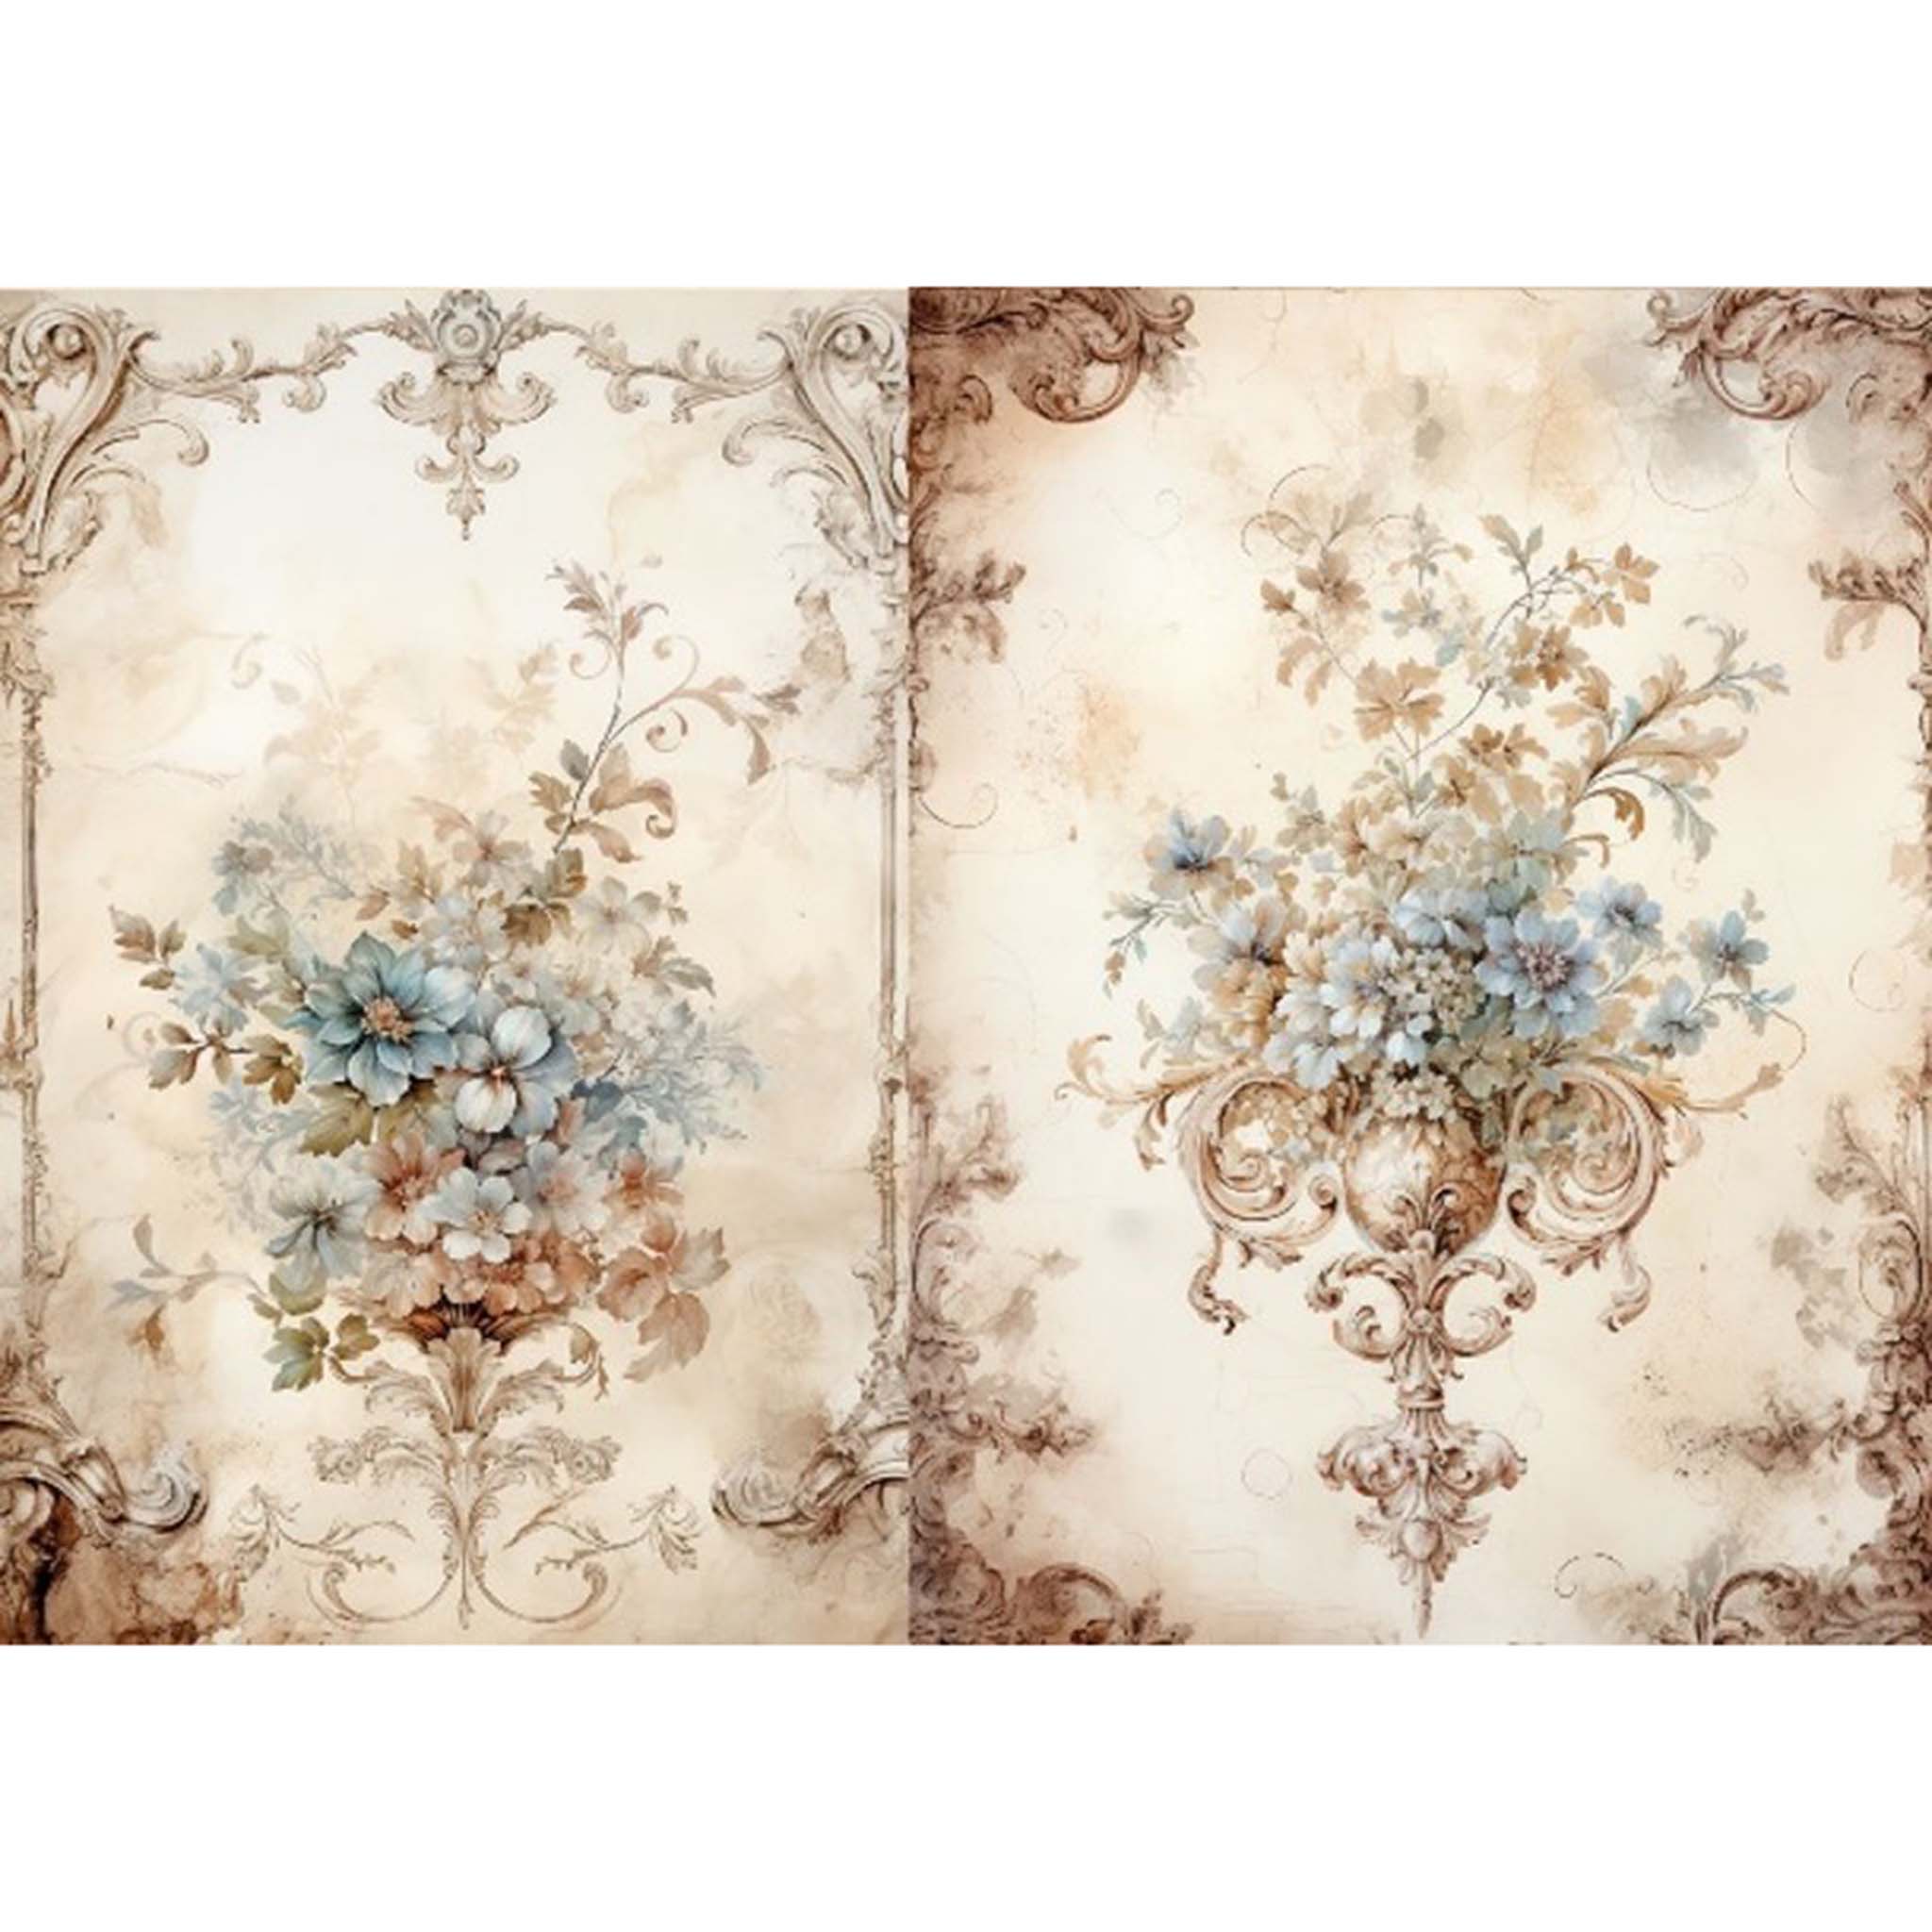 A4 Plus rice paper design that features two playful designs showcasing blue blooms spilling from elegant sconces. White borders are on the top and bottom.